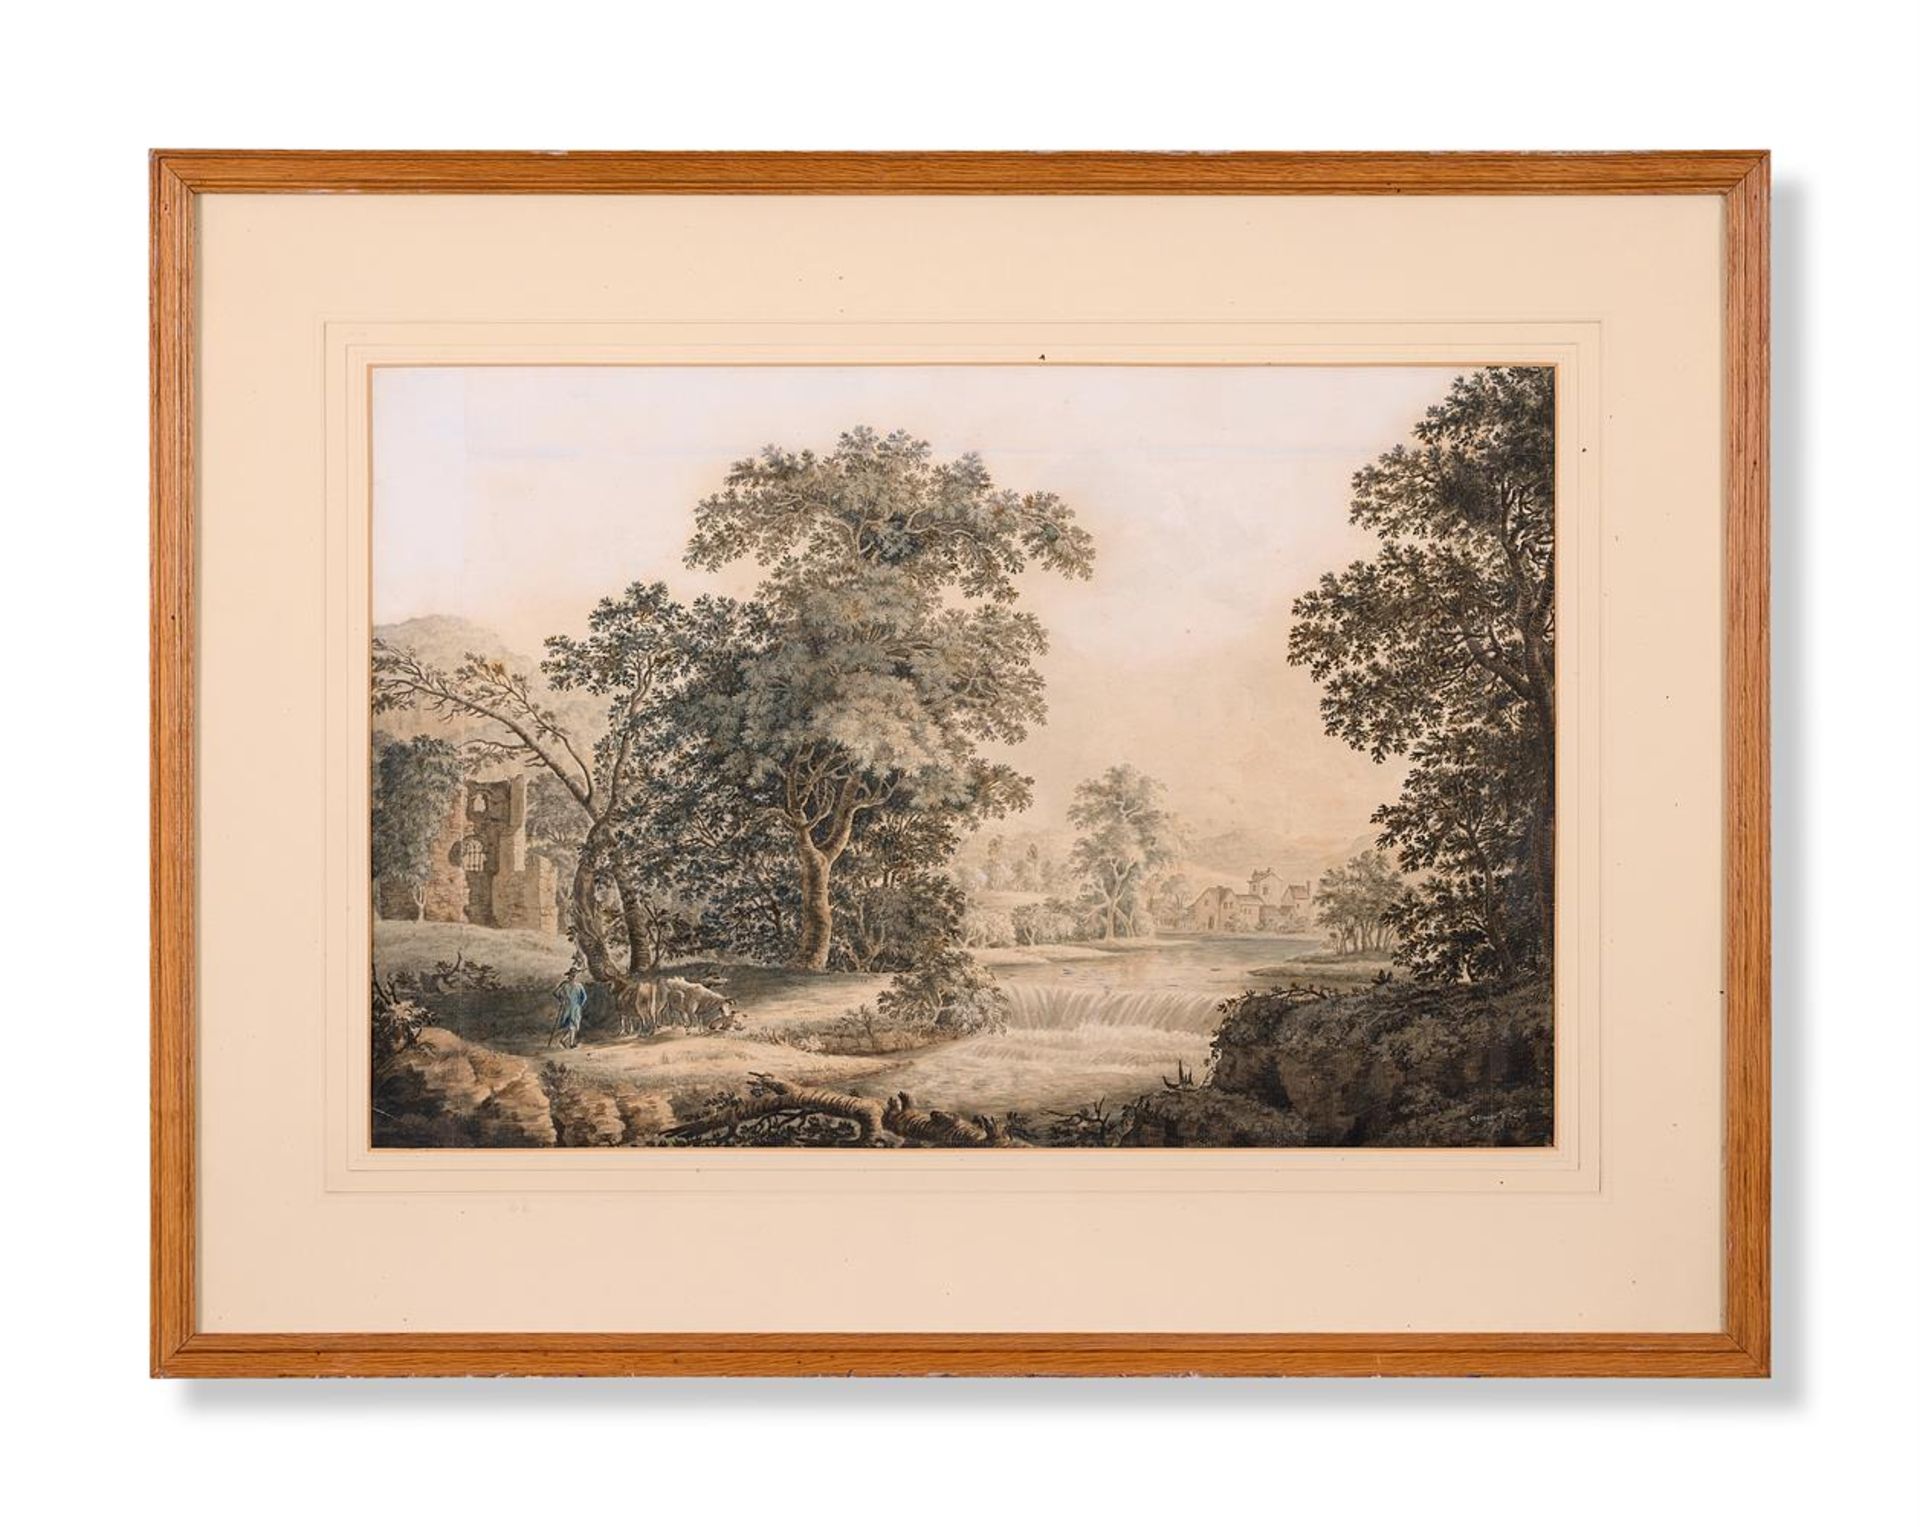 G. BREWSTER (BRITISH 18TH CENTURY), A WOODED LANDSCAPE WITH A DROVER AND CATTLE BEFORE A RUIN